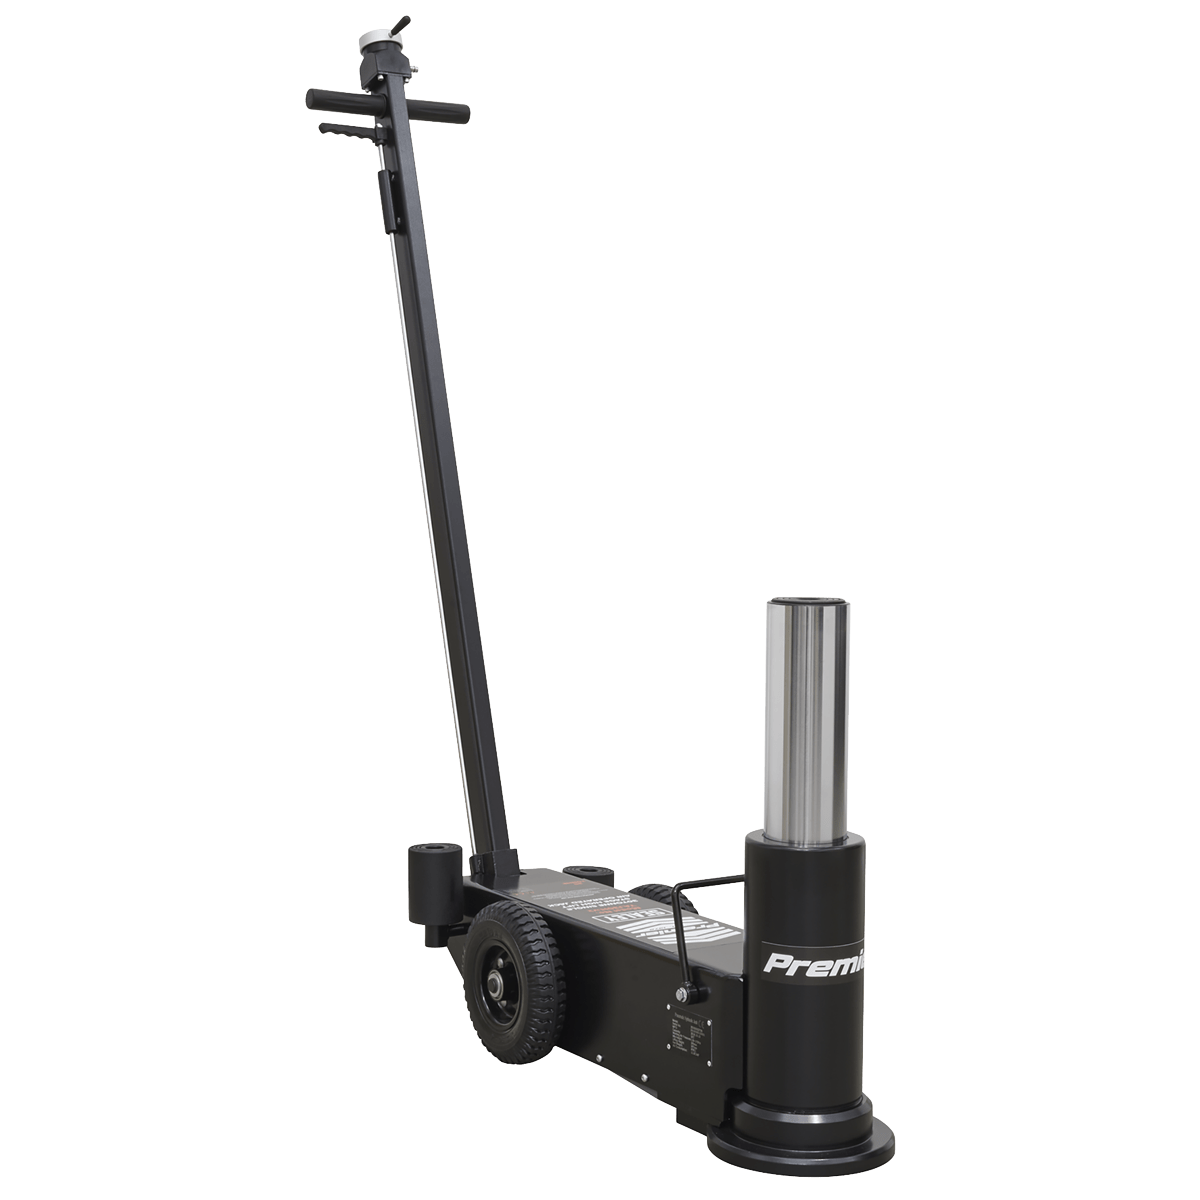 Sealey Air Operated Jack 30 Tonne - Single Stage High Lift